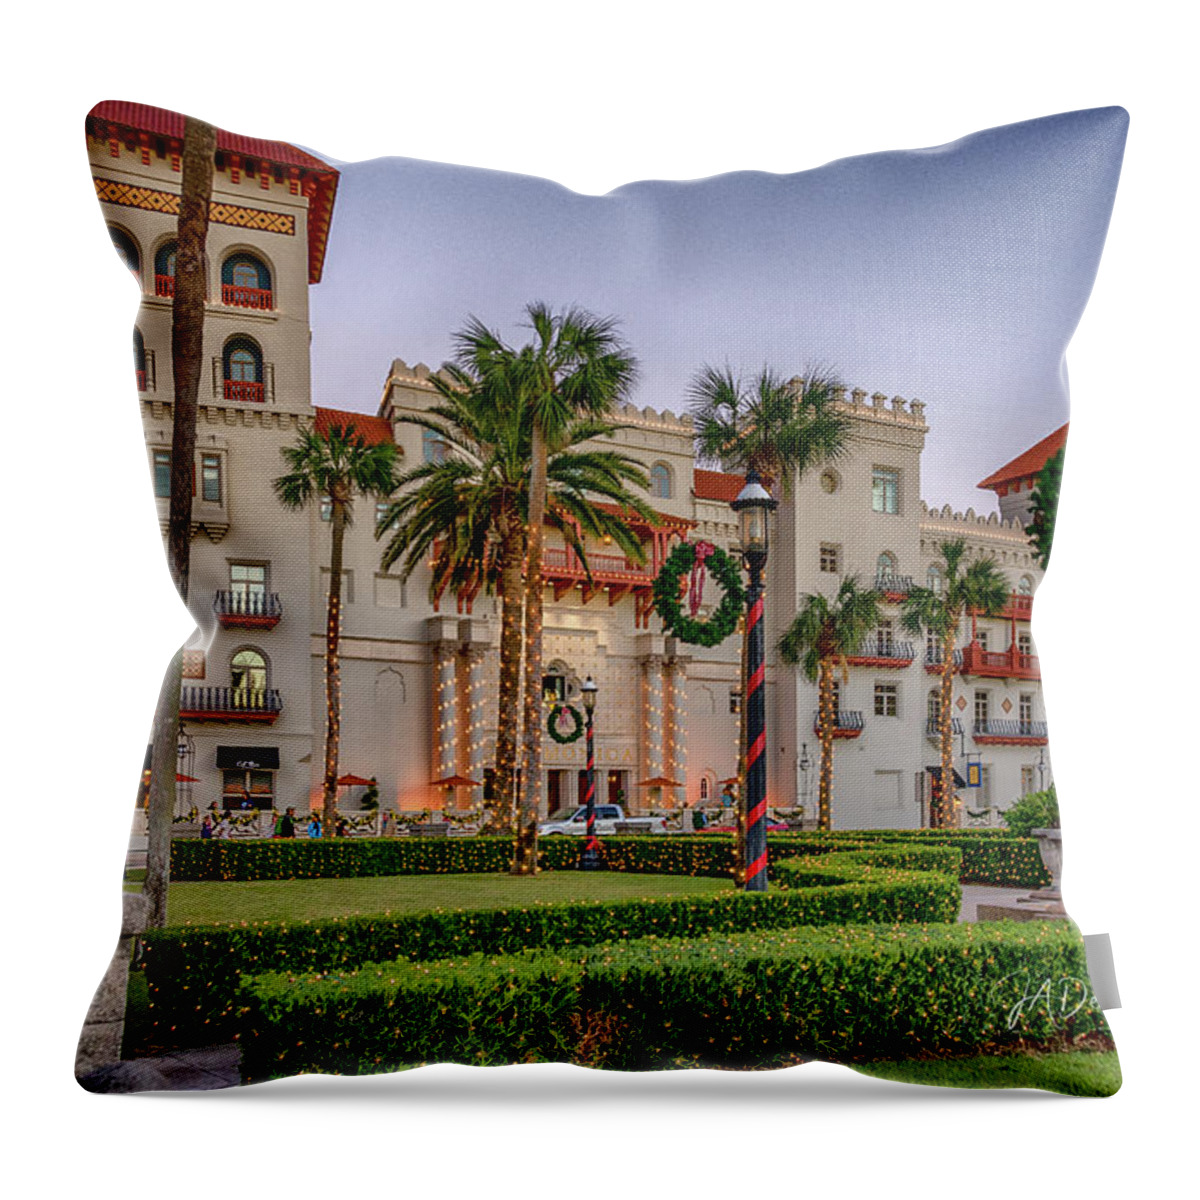 St. Augustine Throw Pillow featuring the photograph St. Augustine Downtown Christmas by Joseph Desiderio